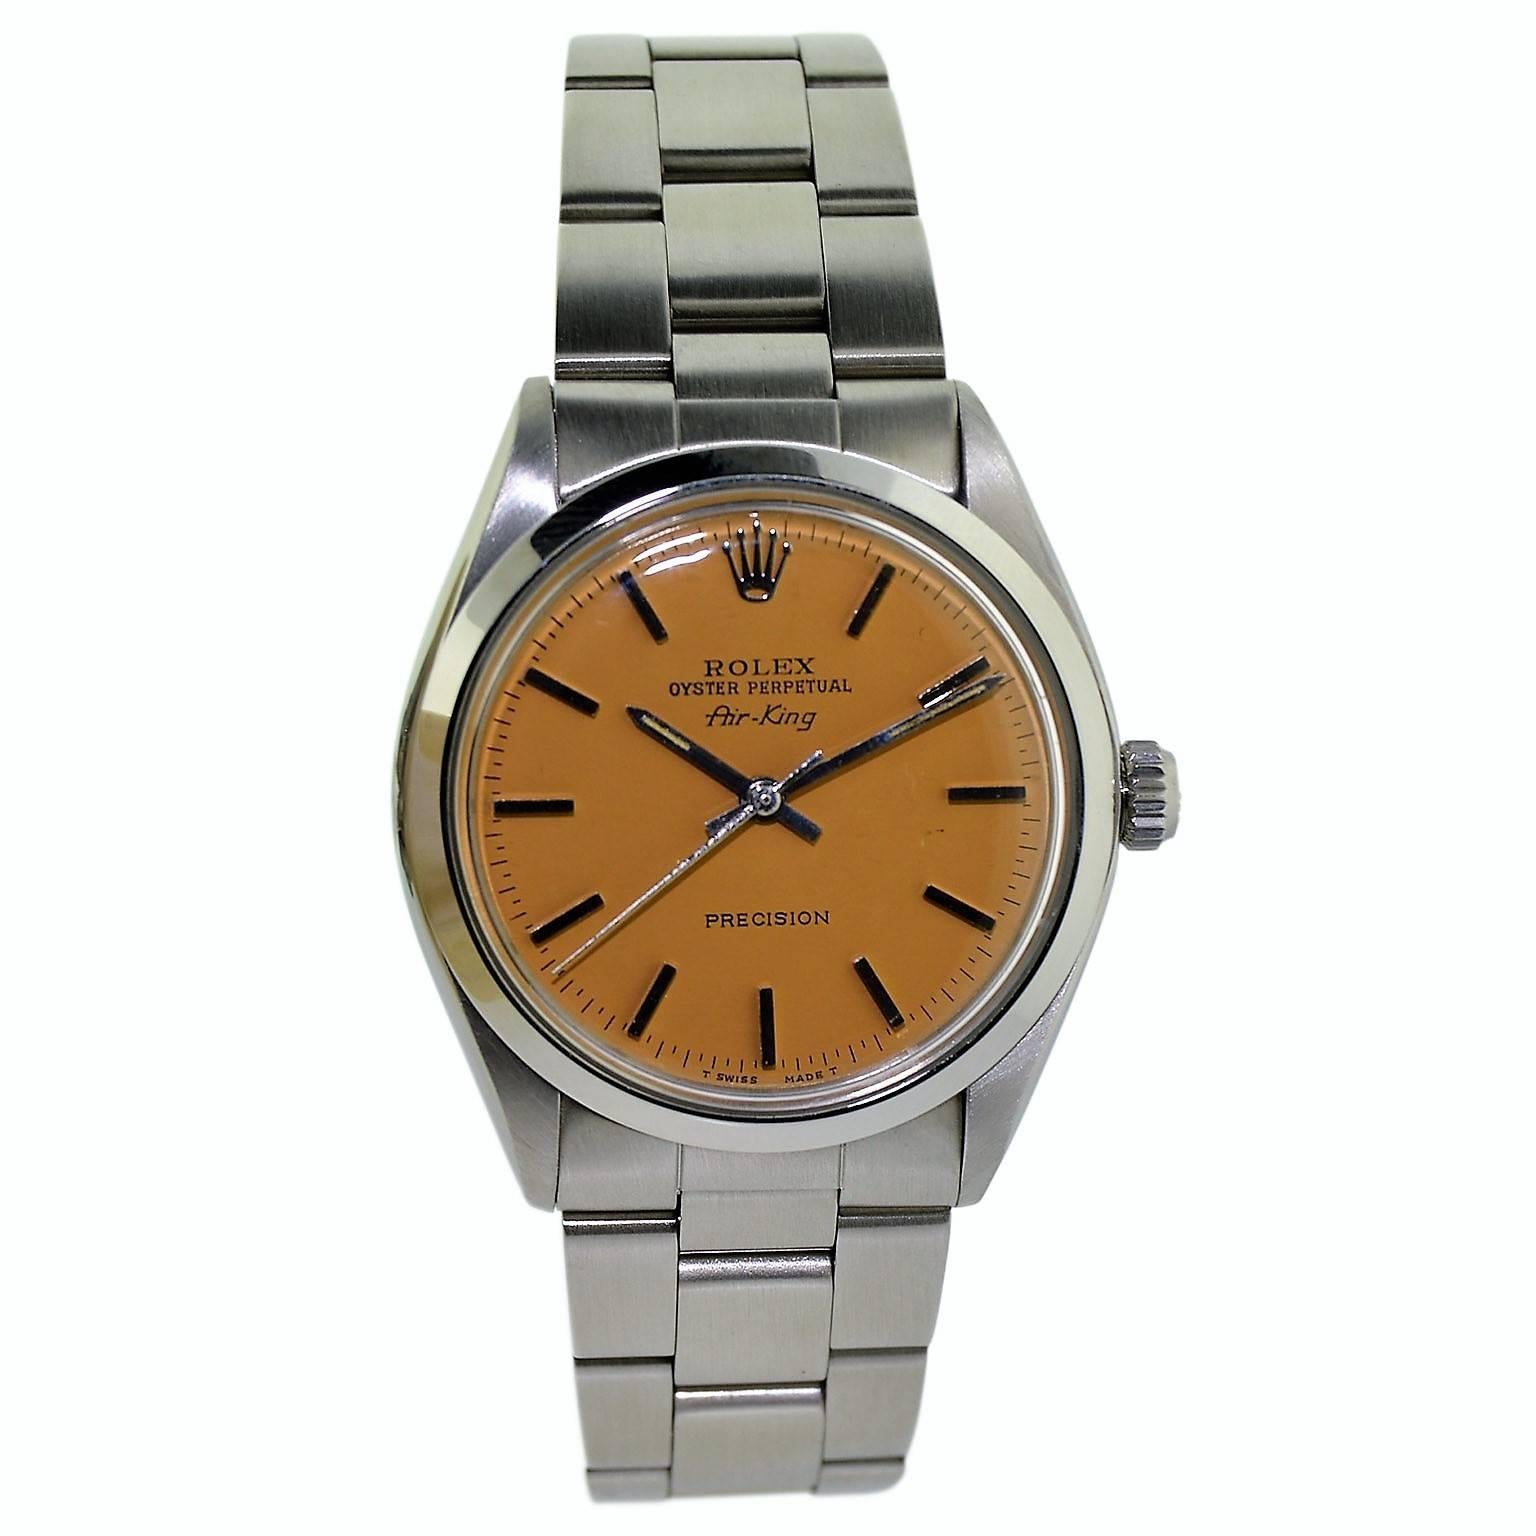 FACTORY / HOUSE: Rolex Watch Comany
STYLE / REFERENCE: Air King / Ref. 5500
METAL / MATERIAL: Stainless Steel 
CIRCA: 1970's
DIMENSIONS: 39mm X 34mm
MOVEMENT / CALIBER: Perpetual Winding / 26 Jewels / Cal. 1520
DIAL / HANDS: Custom Burnt Orange with